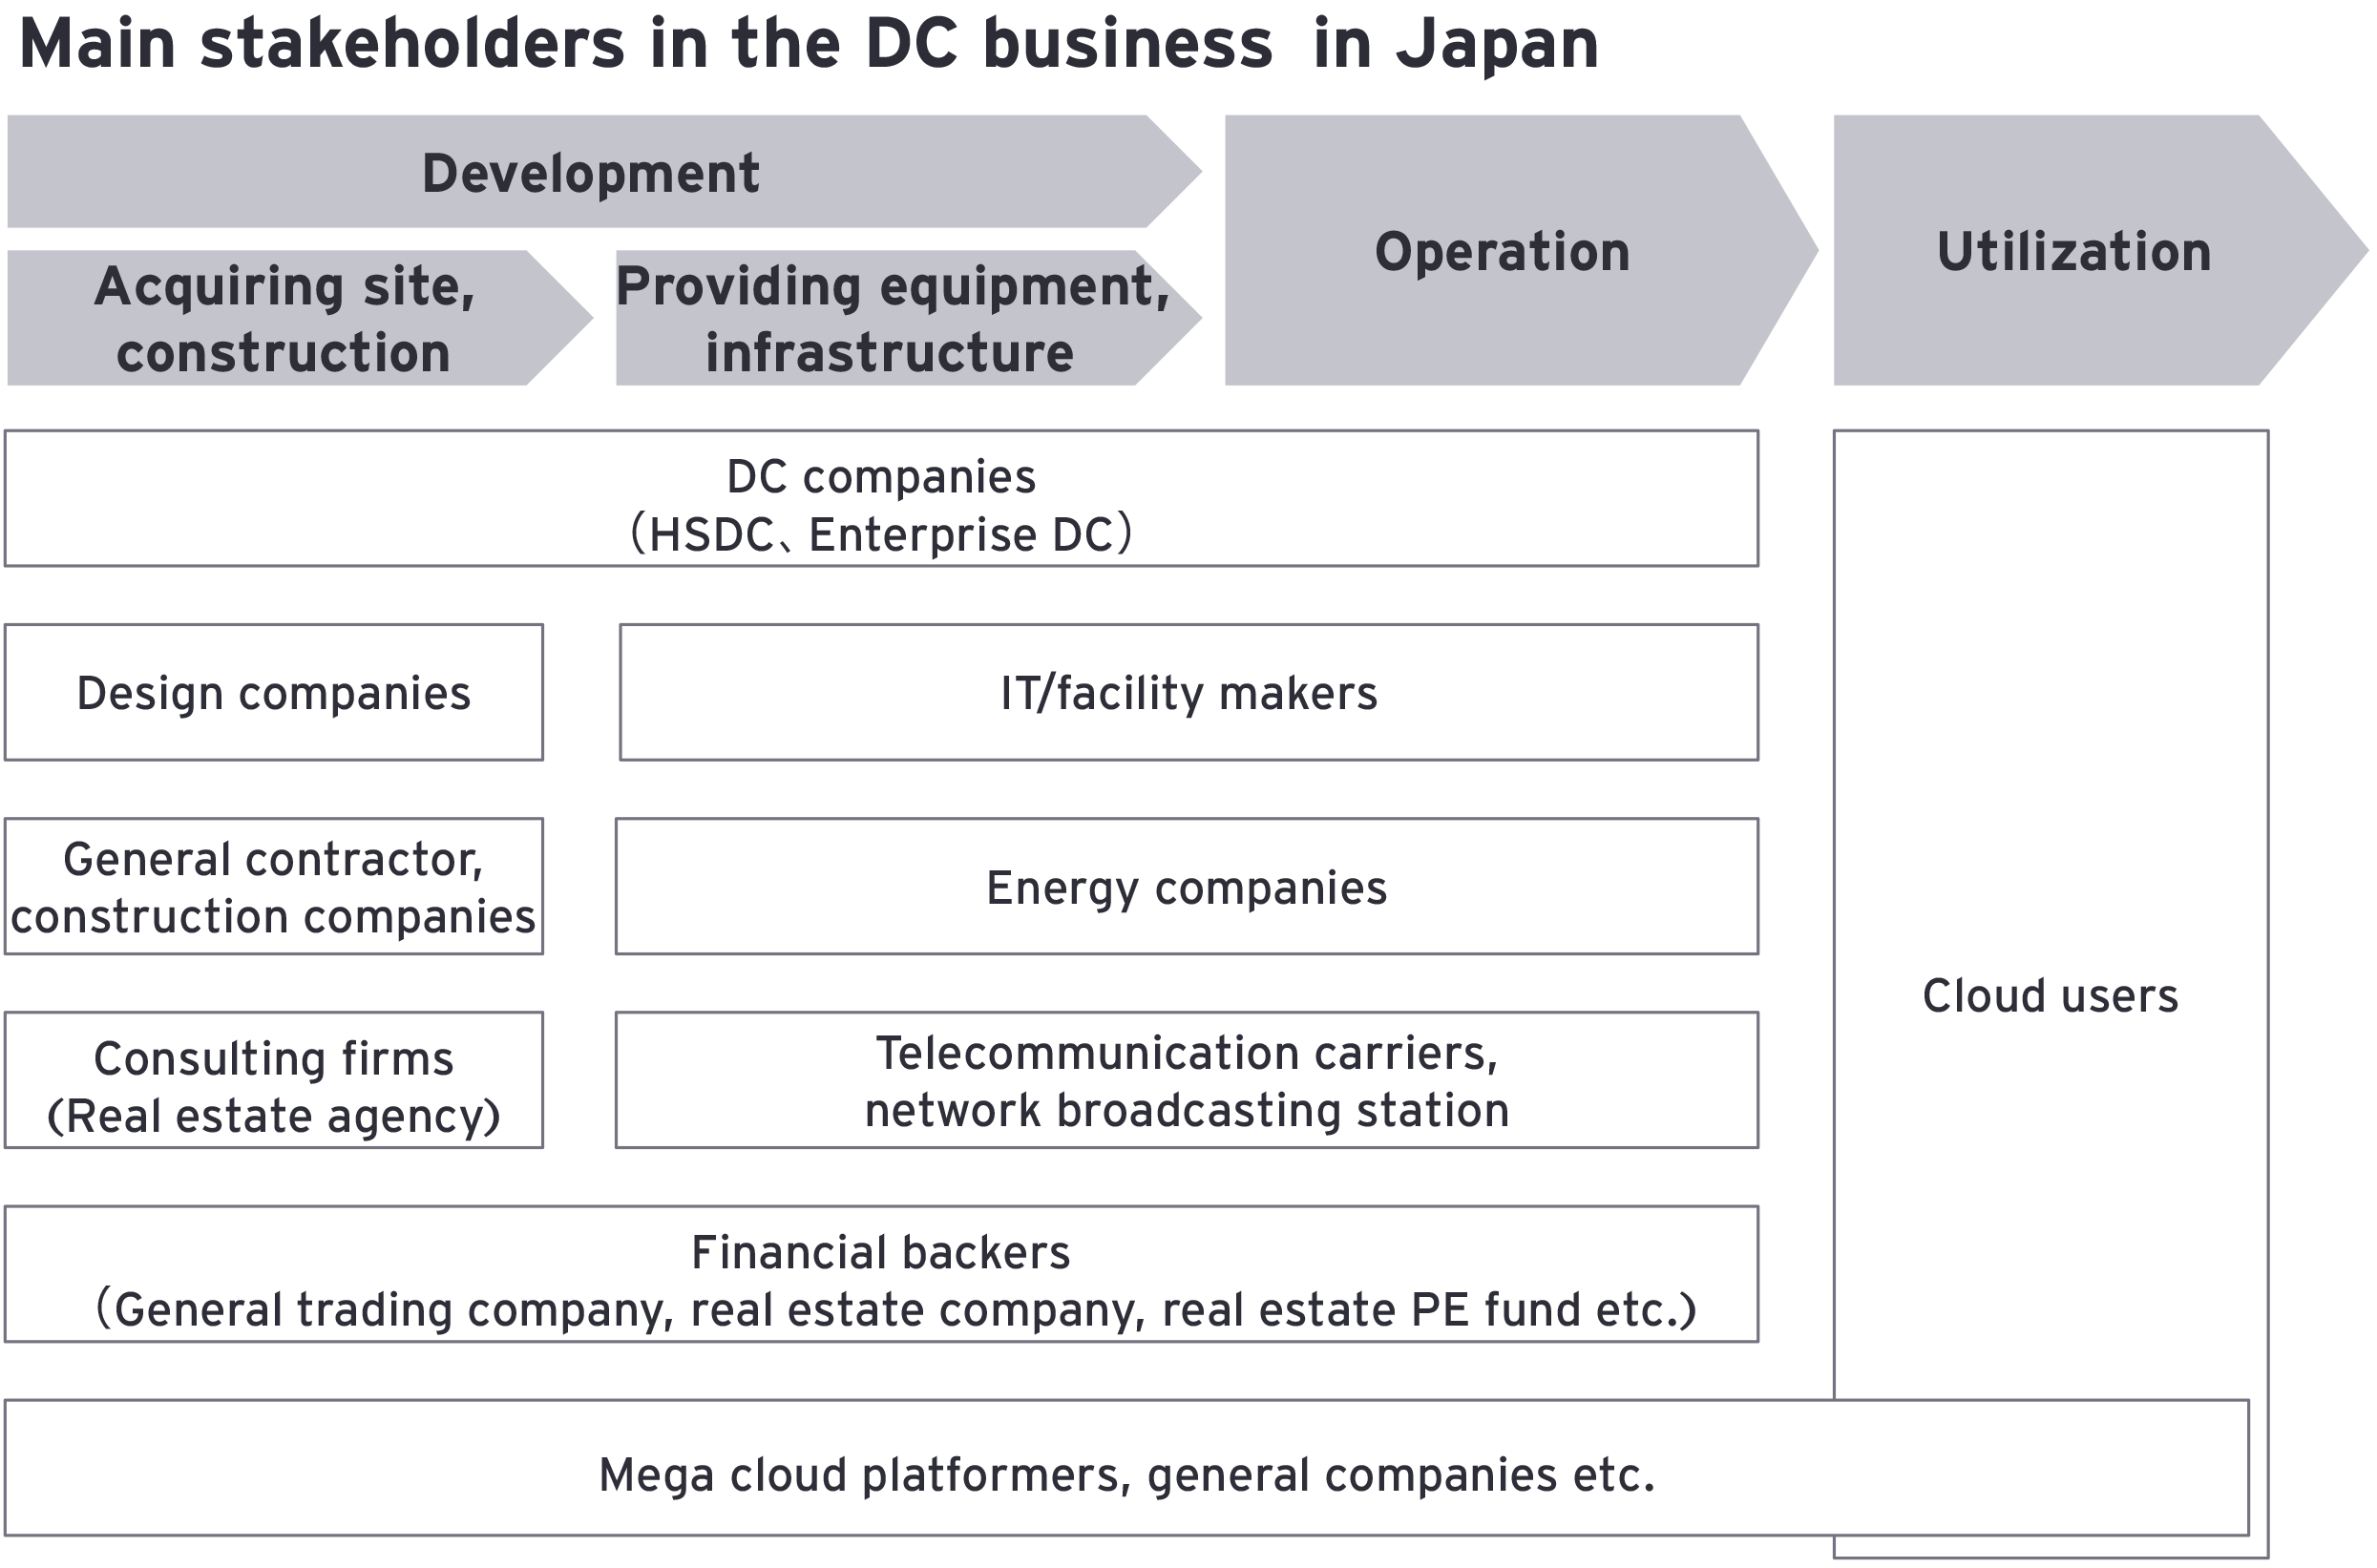 Main stakeholders in the DC business in Japan